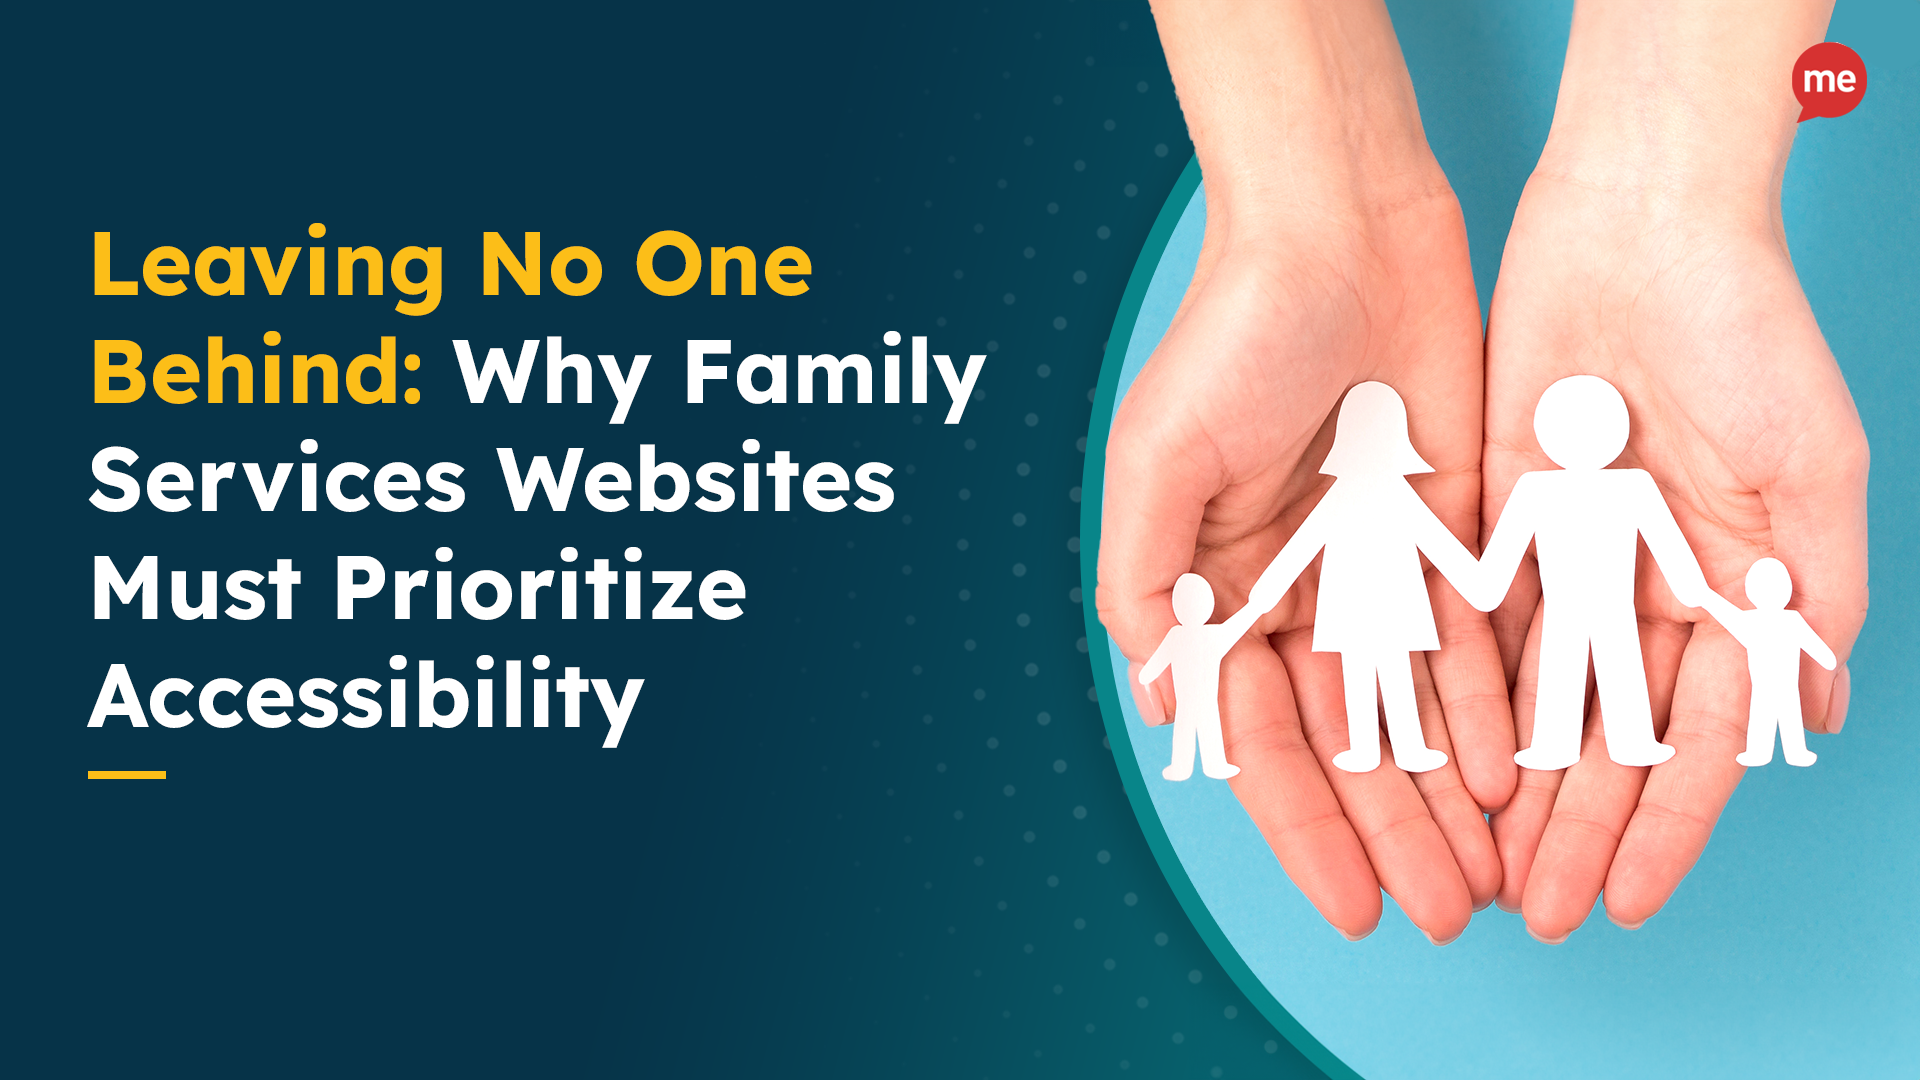 Leaving No One Behind: Why Family Services Websites Must Prioritize Accessibility